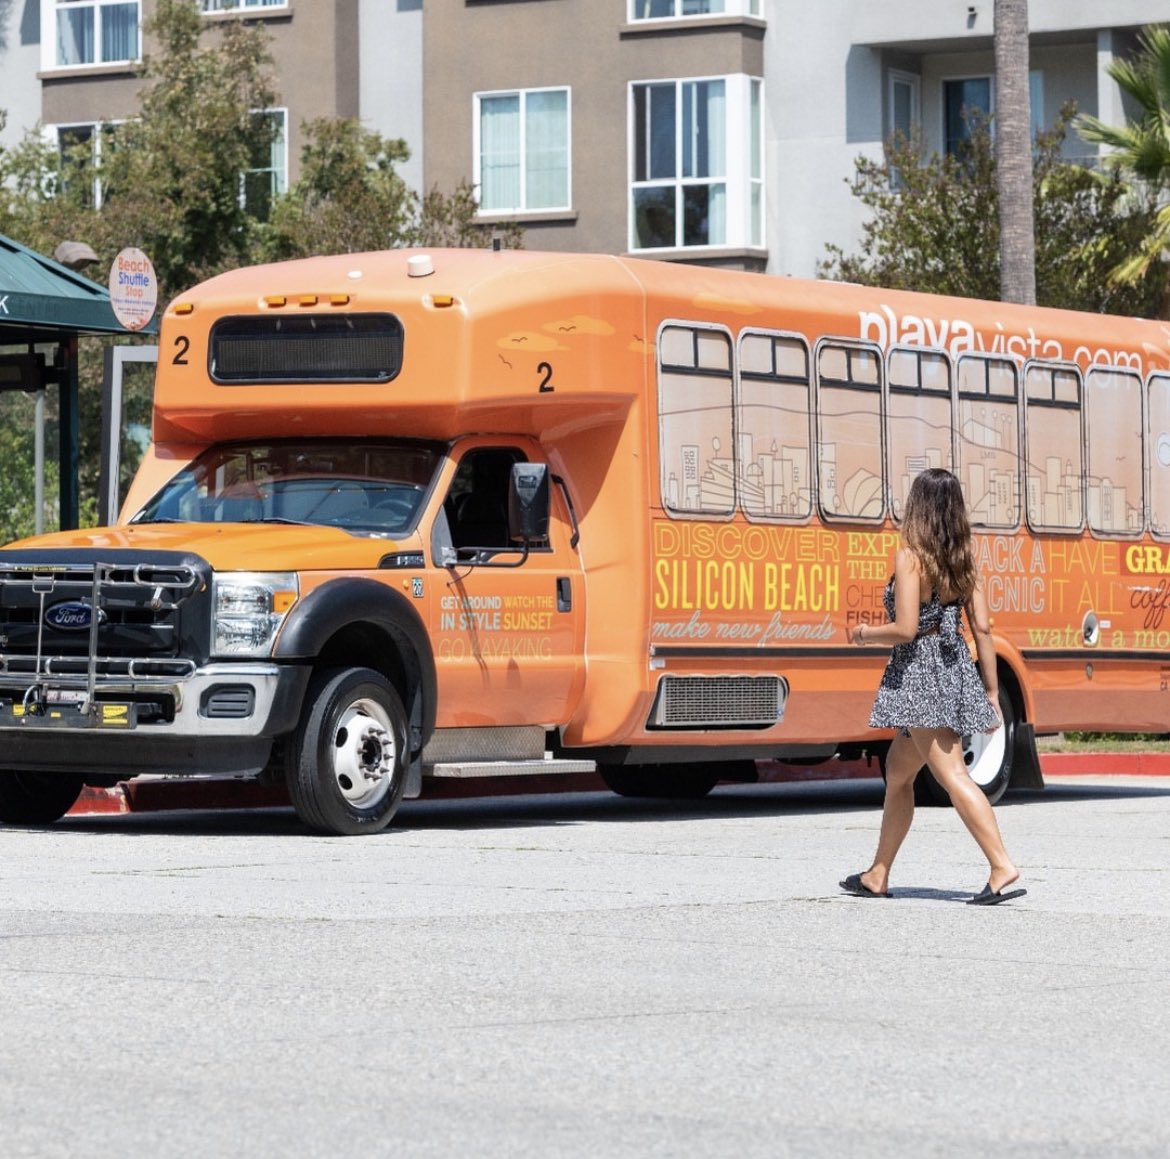 💫Starting Saturday, May 25, the free BEACH SHUTTLE is back and ready to take you to major points of interest around Marina del Rey, such as Playa Vista, Fisherman’s Village, Mother’s Beach and Venice Pier, all summer long. ✨Visit beaches.lacounty.gov for more details.